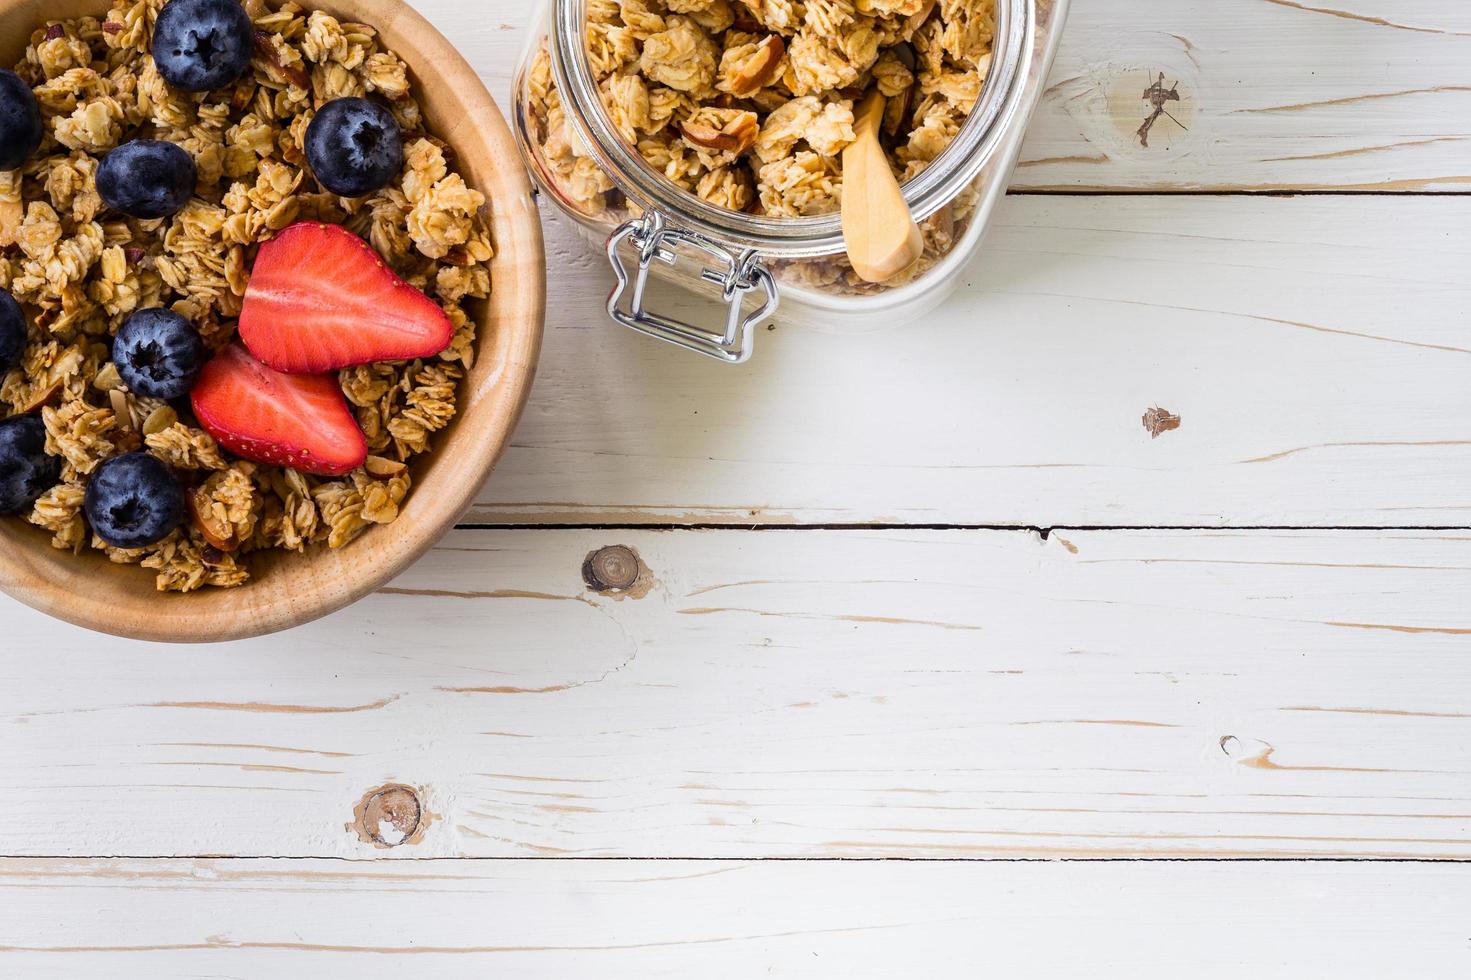 Homemade granola and fresh berries on wood table with space. photo